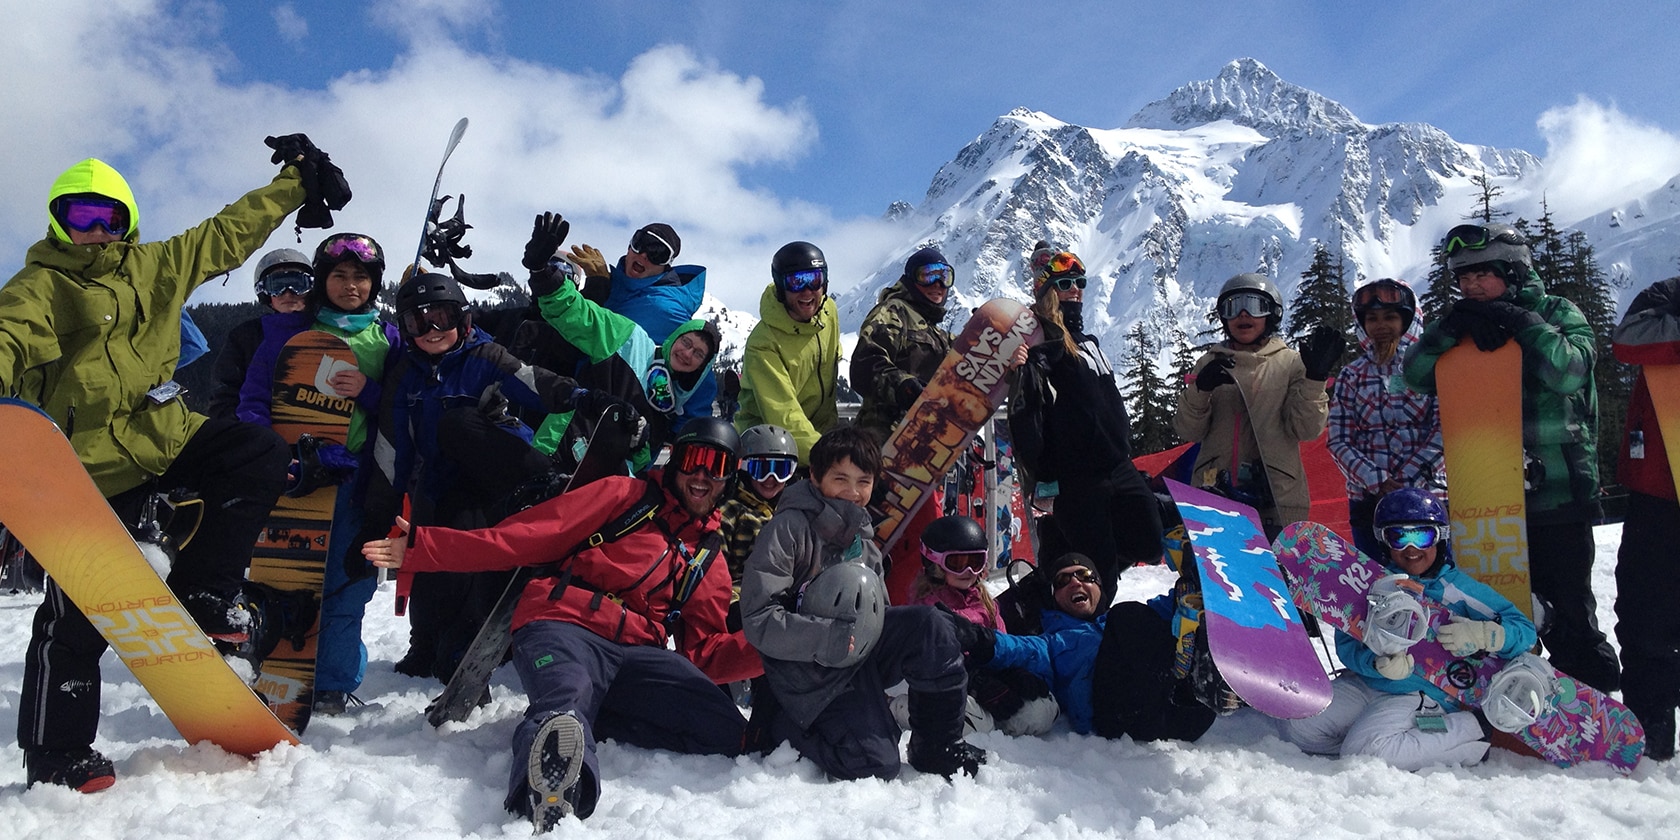 group of snowboarders posing for a picture in the snow with their snowboards